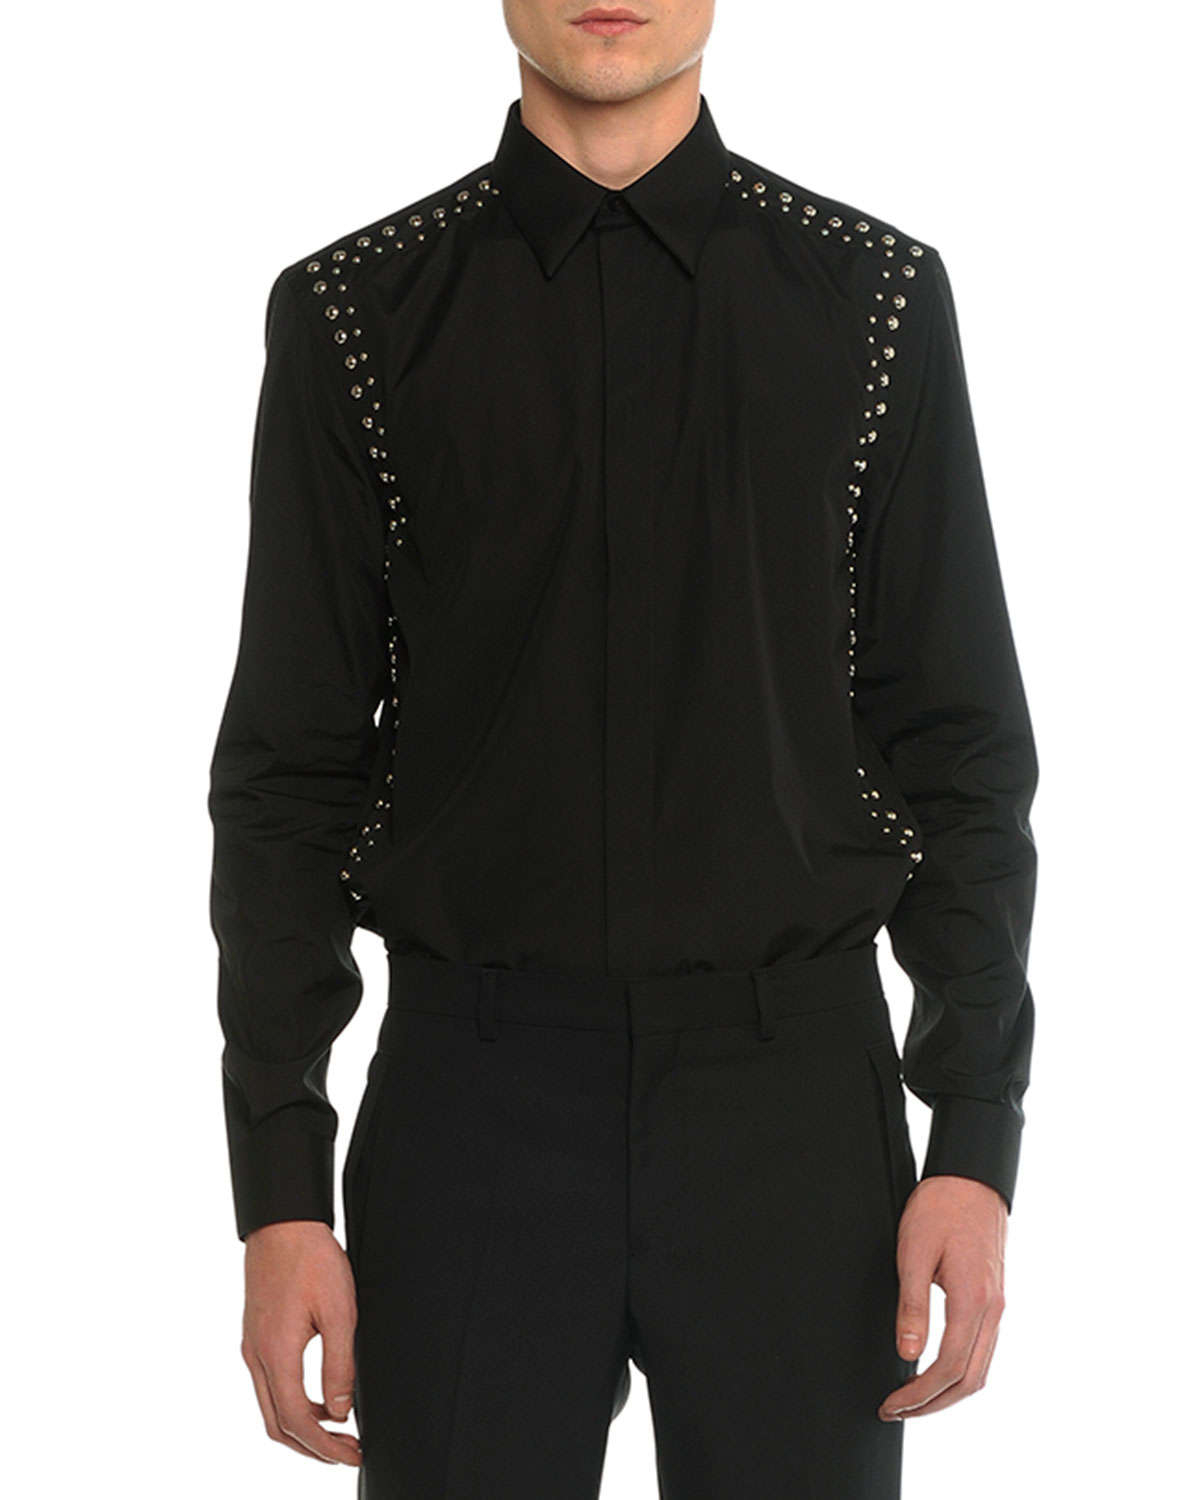 Lyst - Givenchy Studded Harness Long-sleeve Shirt in Black for Men